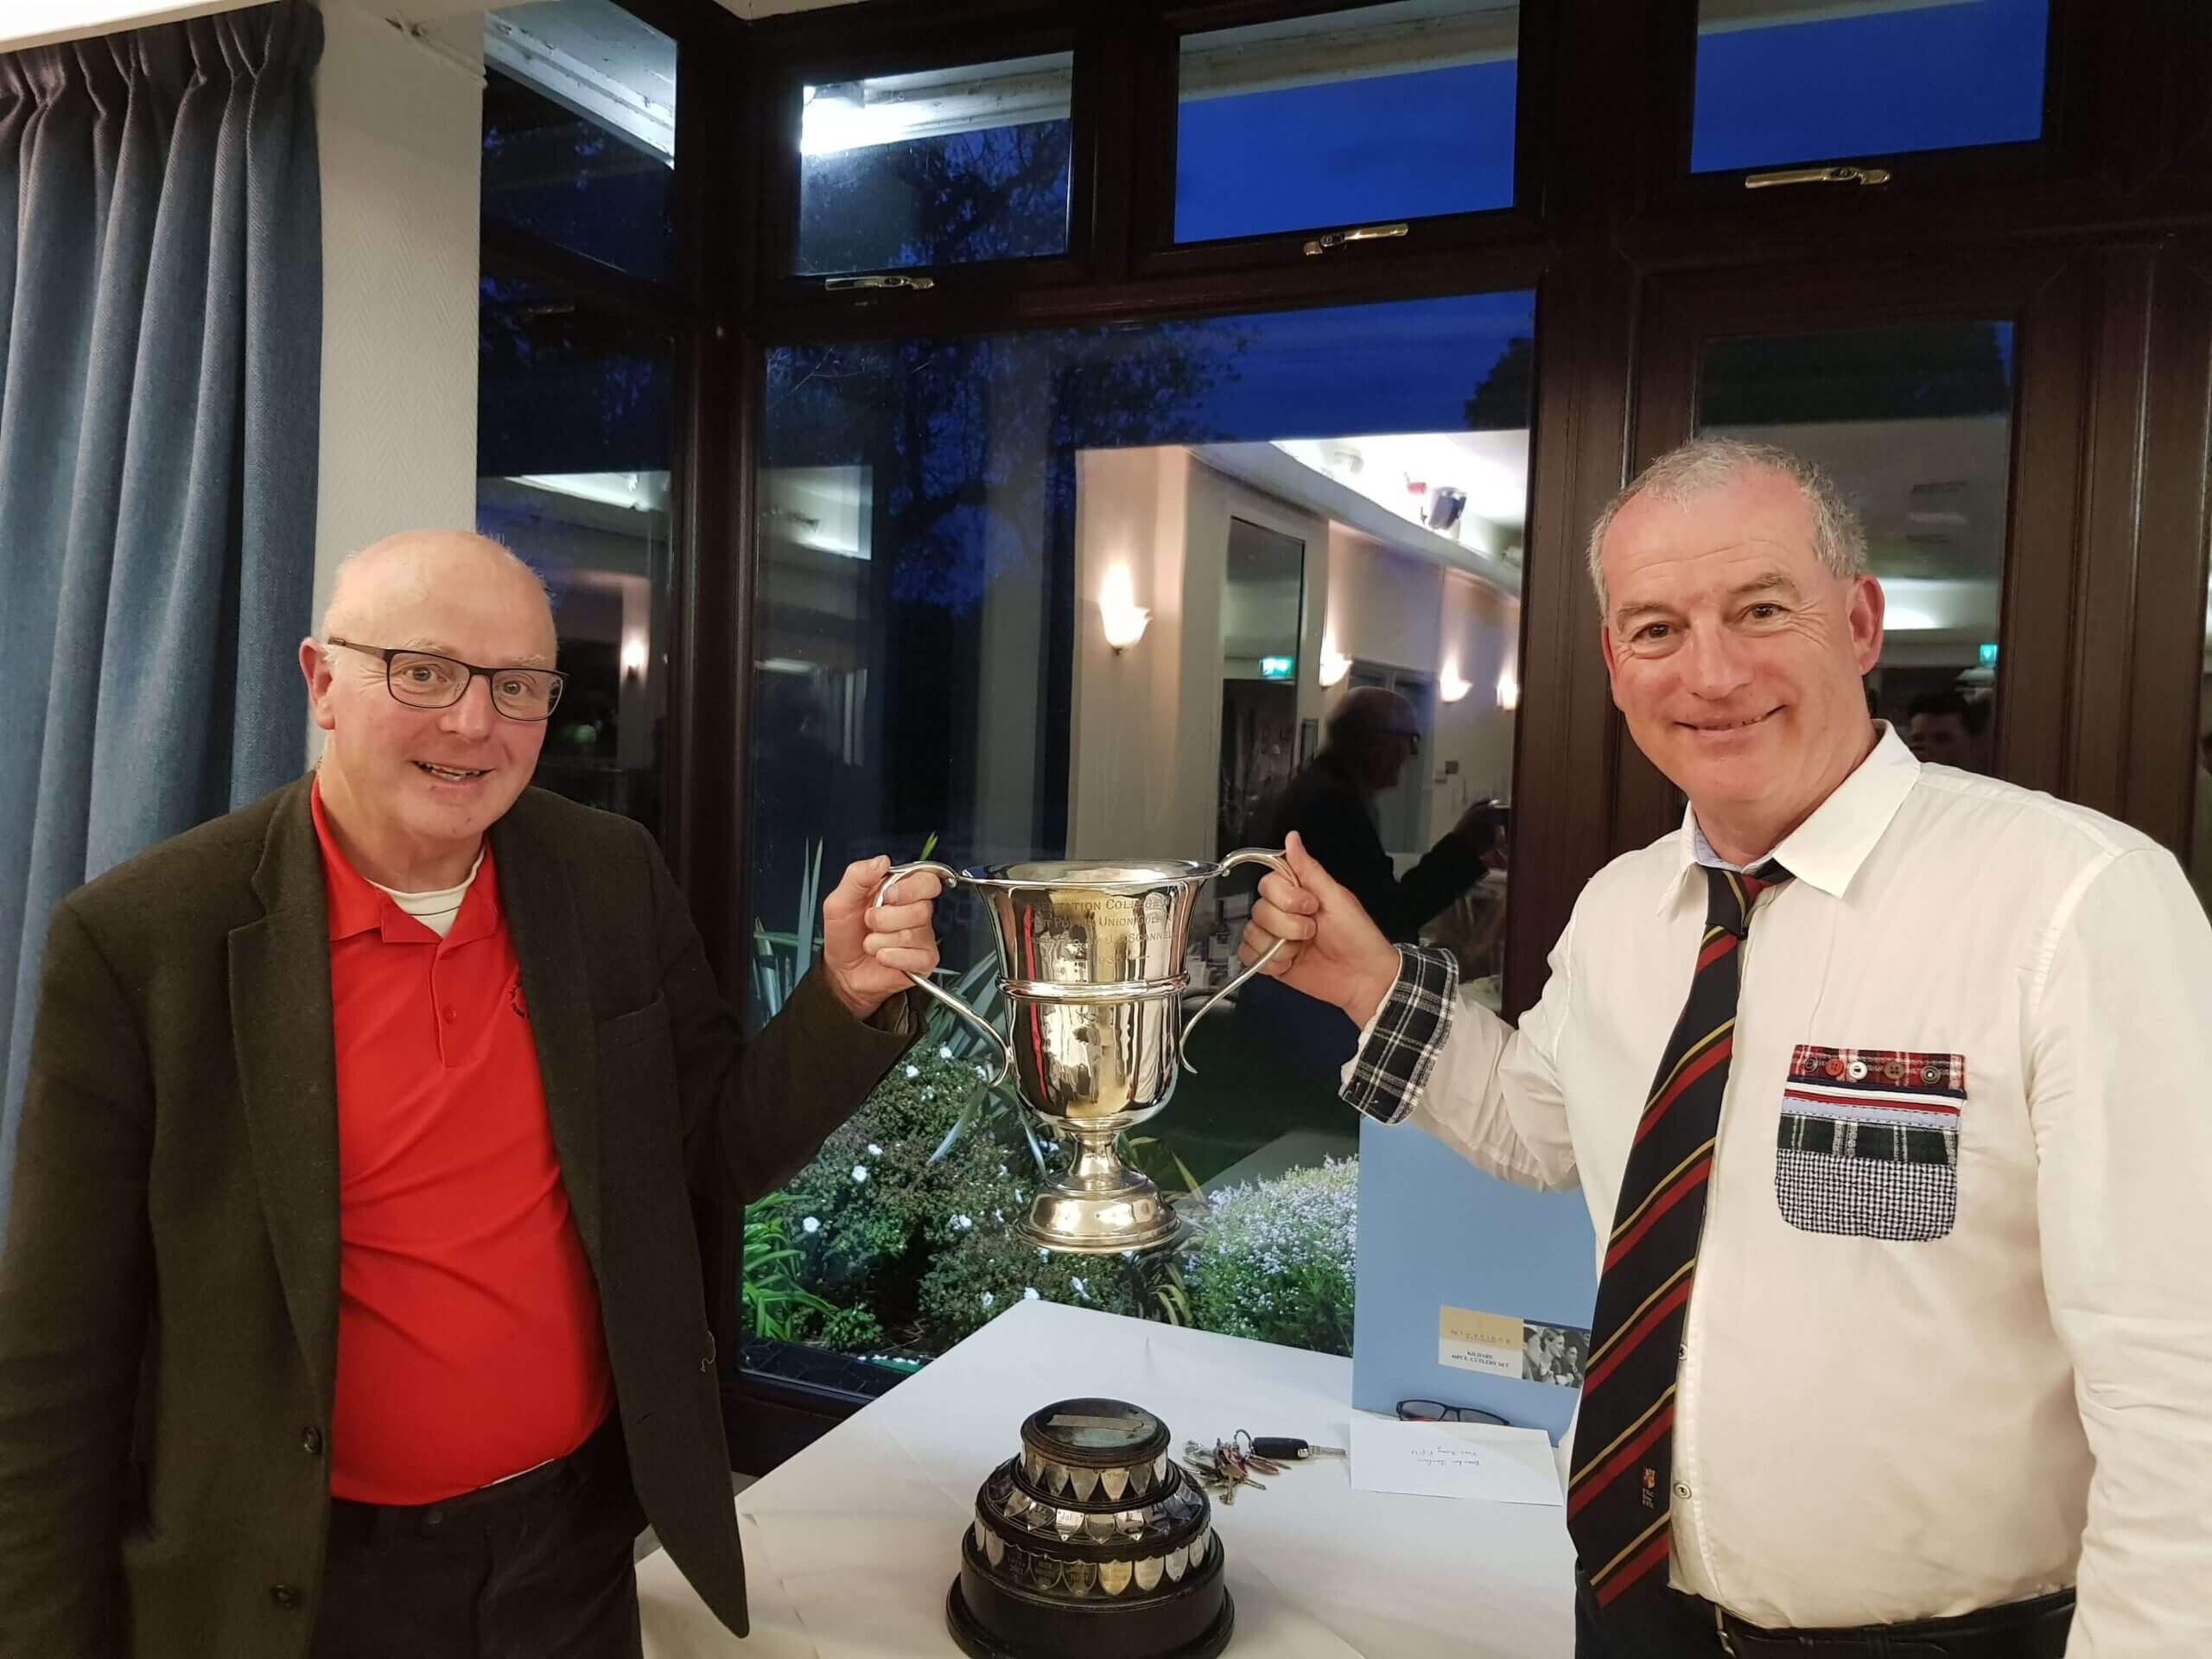 Past Pupils Golf Outing in Woodbrook Golf Club in May 2019